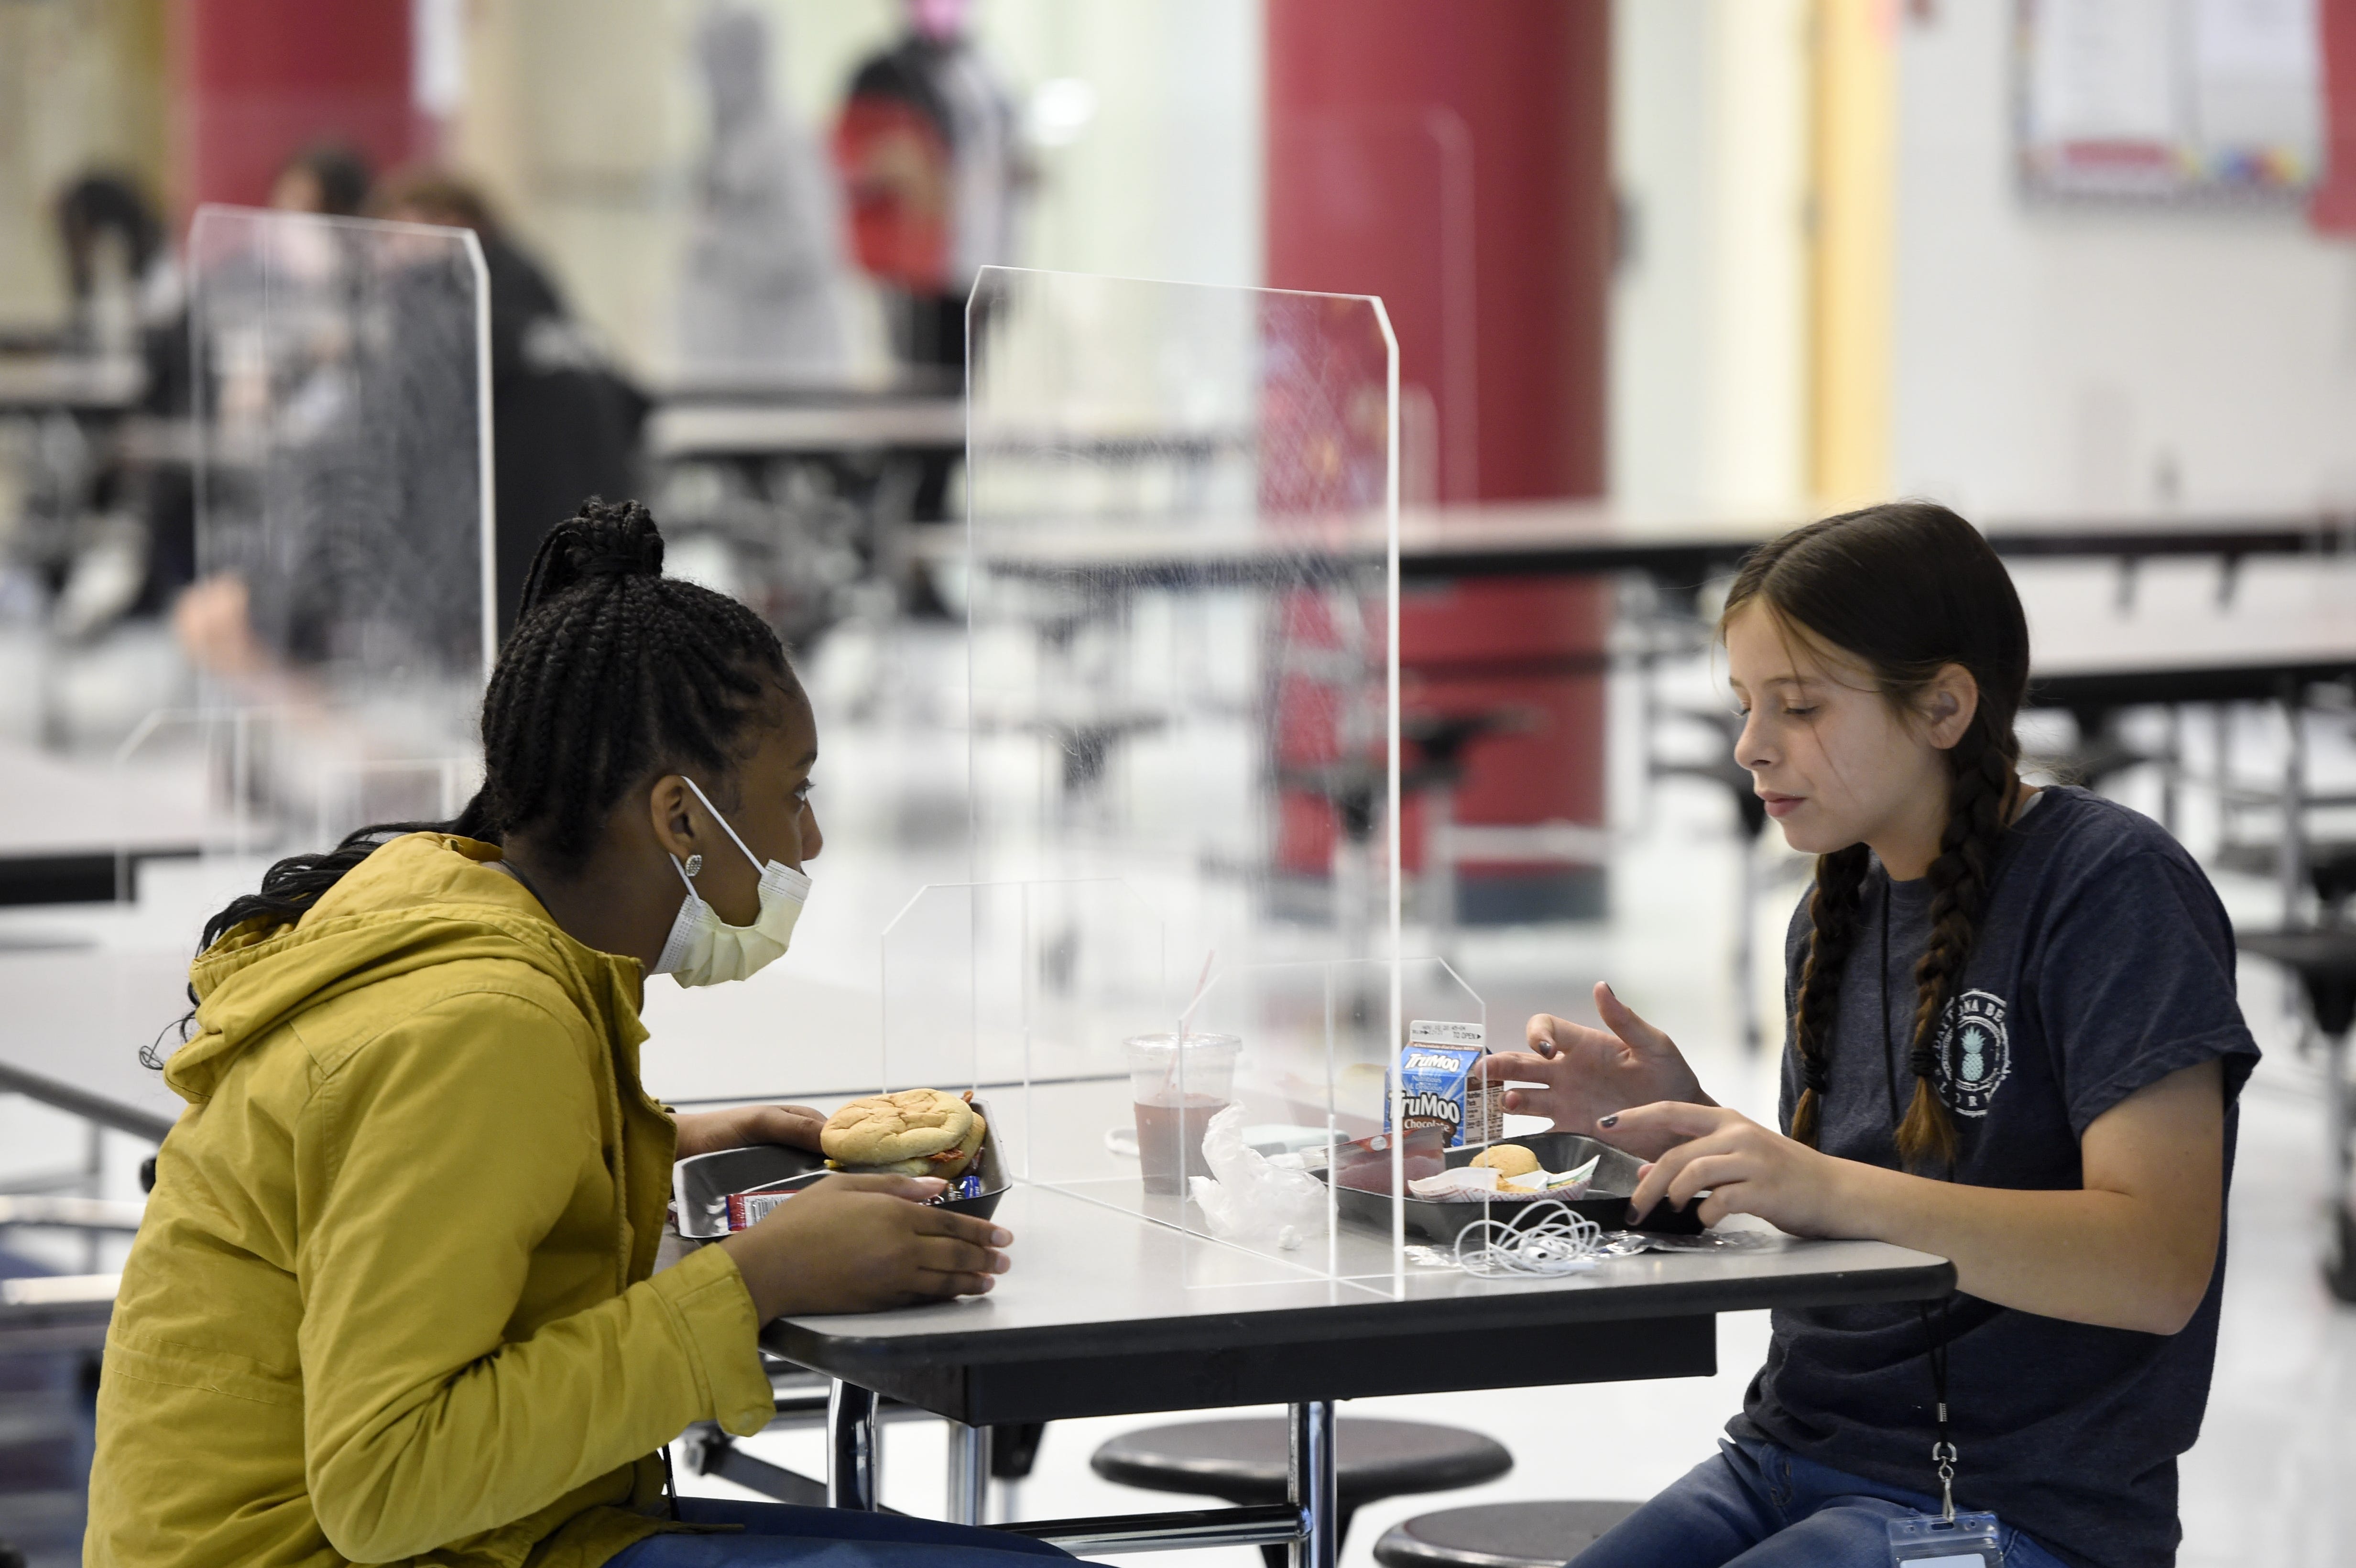 Students eat lunch while separated by clear dividers, so they can socialize and eat without a mask at Grovetown Middle School in 2020 in Georgia.